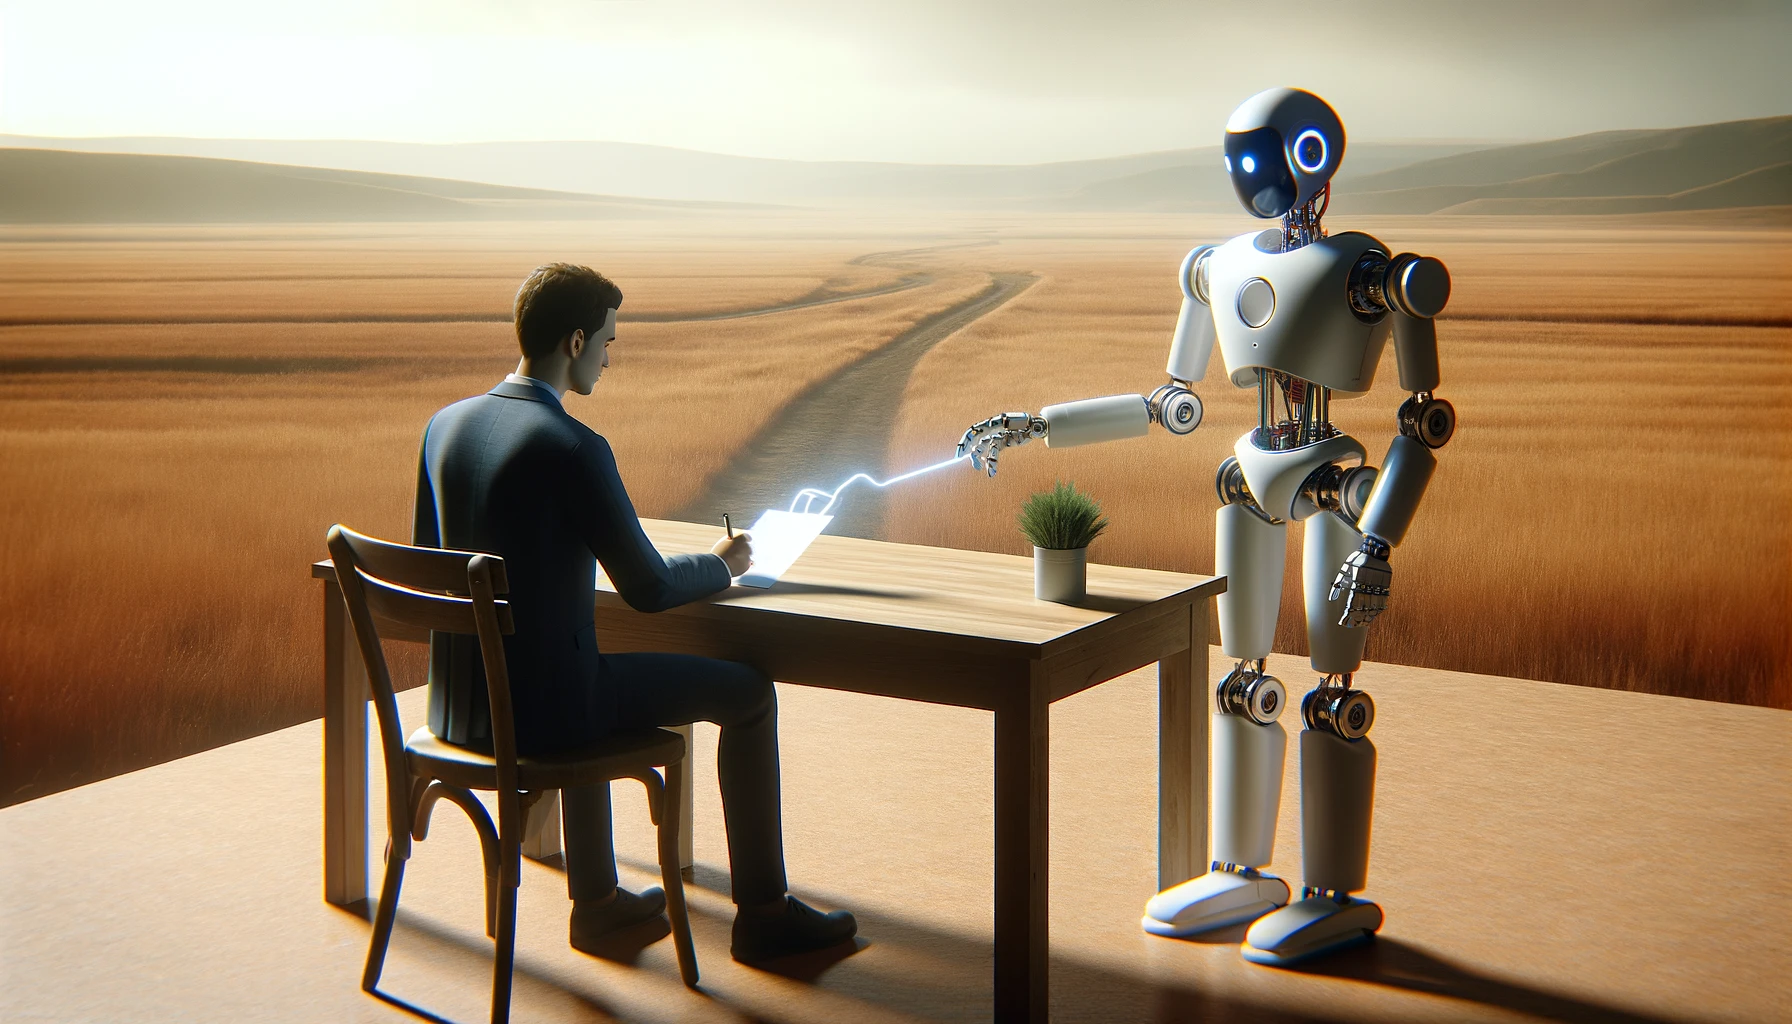 Robot and Man signing a contract